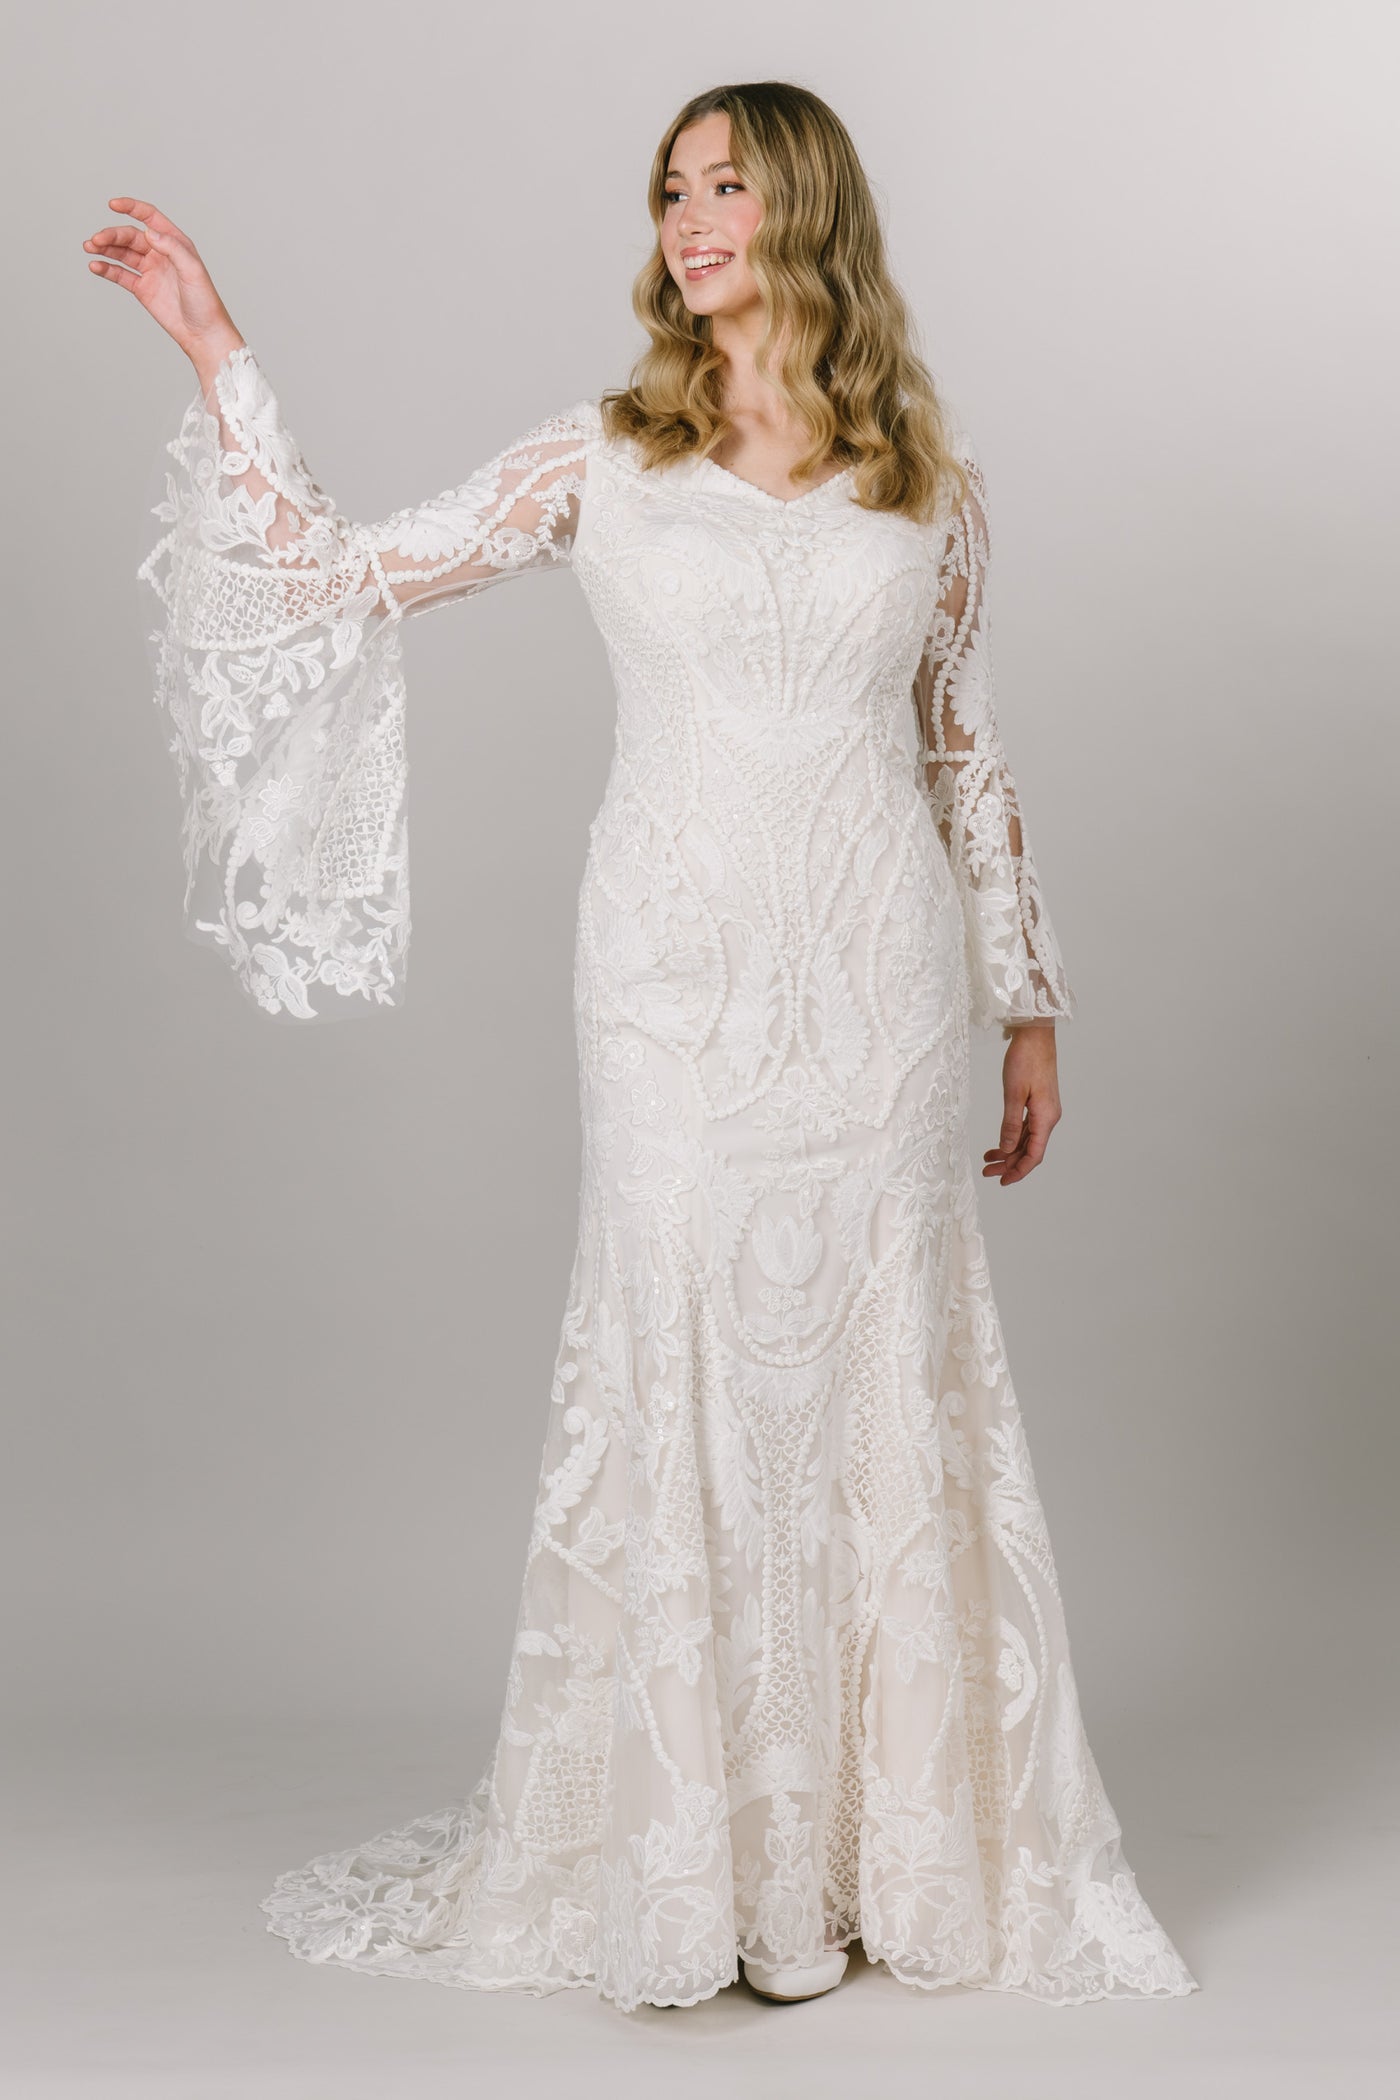 Moments Made Bridal boho styled wedding dress with long trumpet lace sleeves. It has a v-neckline and a fitted silhouette. Sheet lace covers the dress. This modest wedding dress is perfect for any wedding season. 